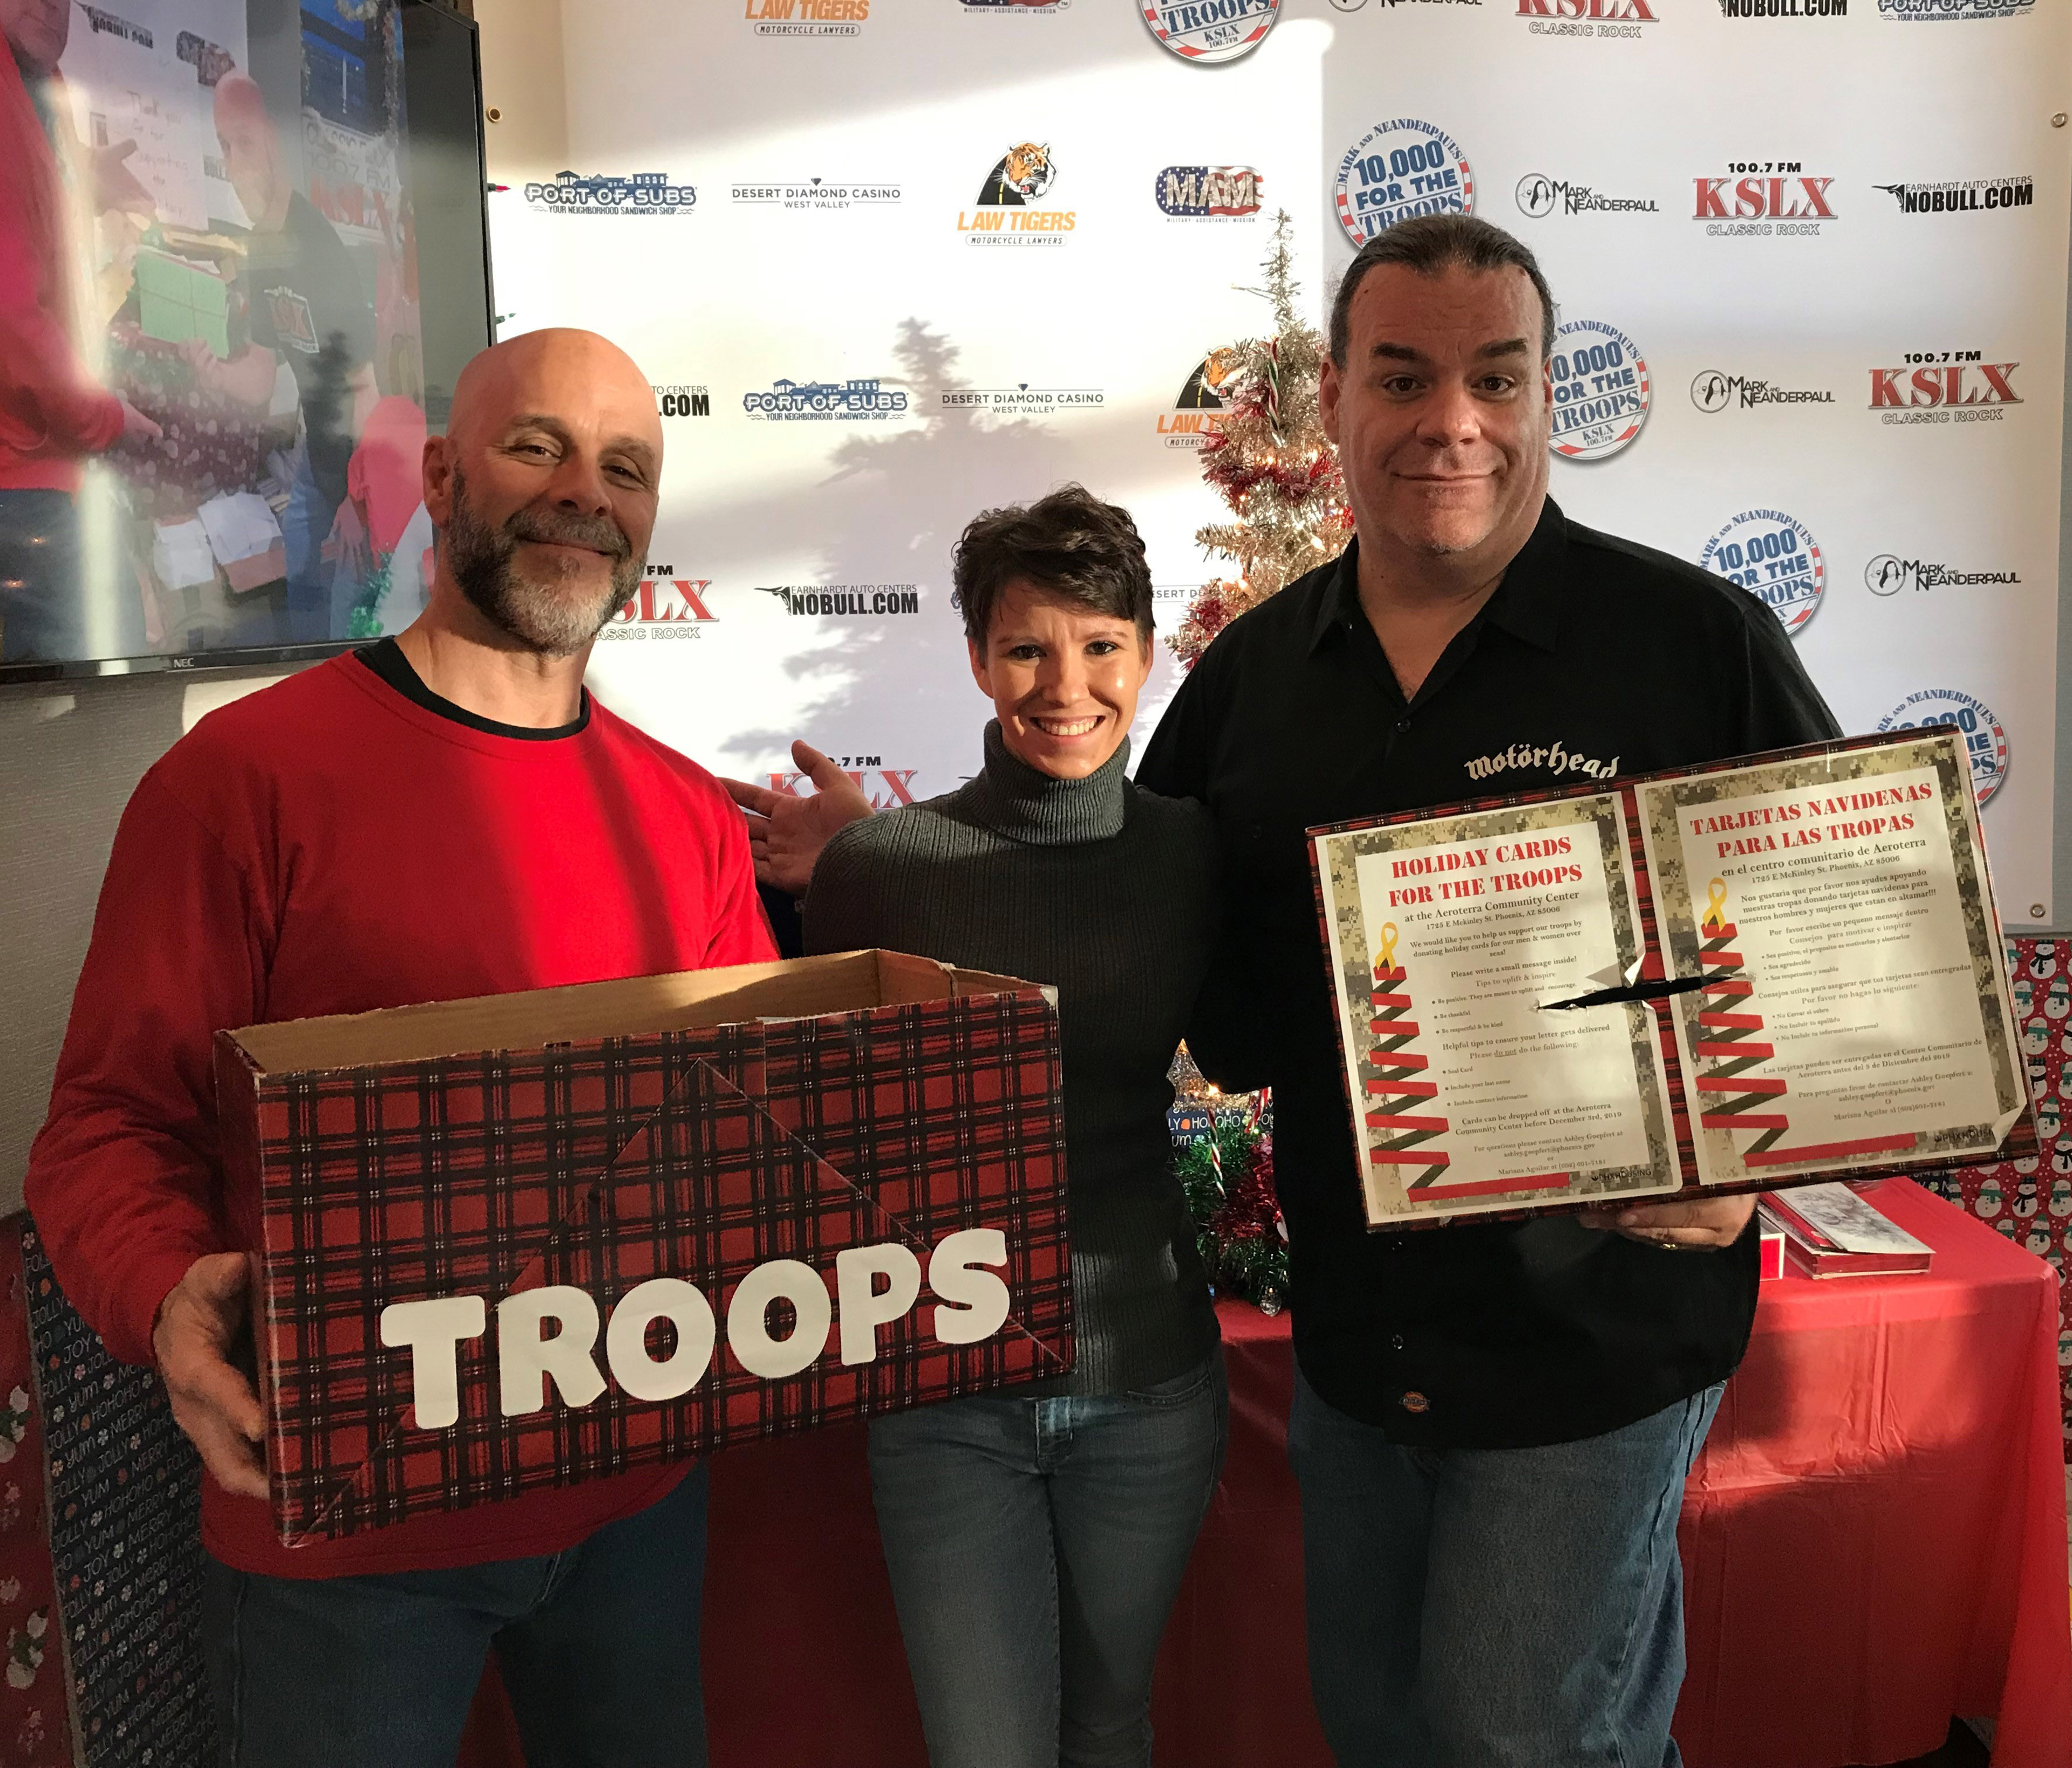 Holiday Cards for the Troops KSLX